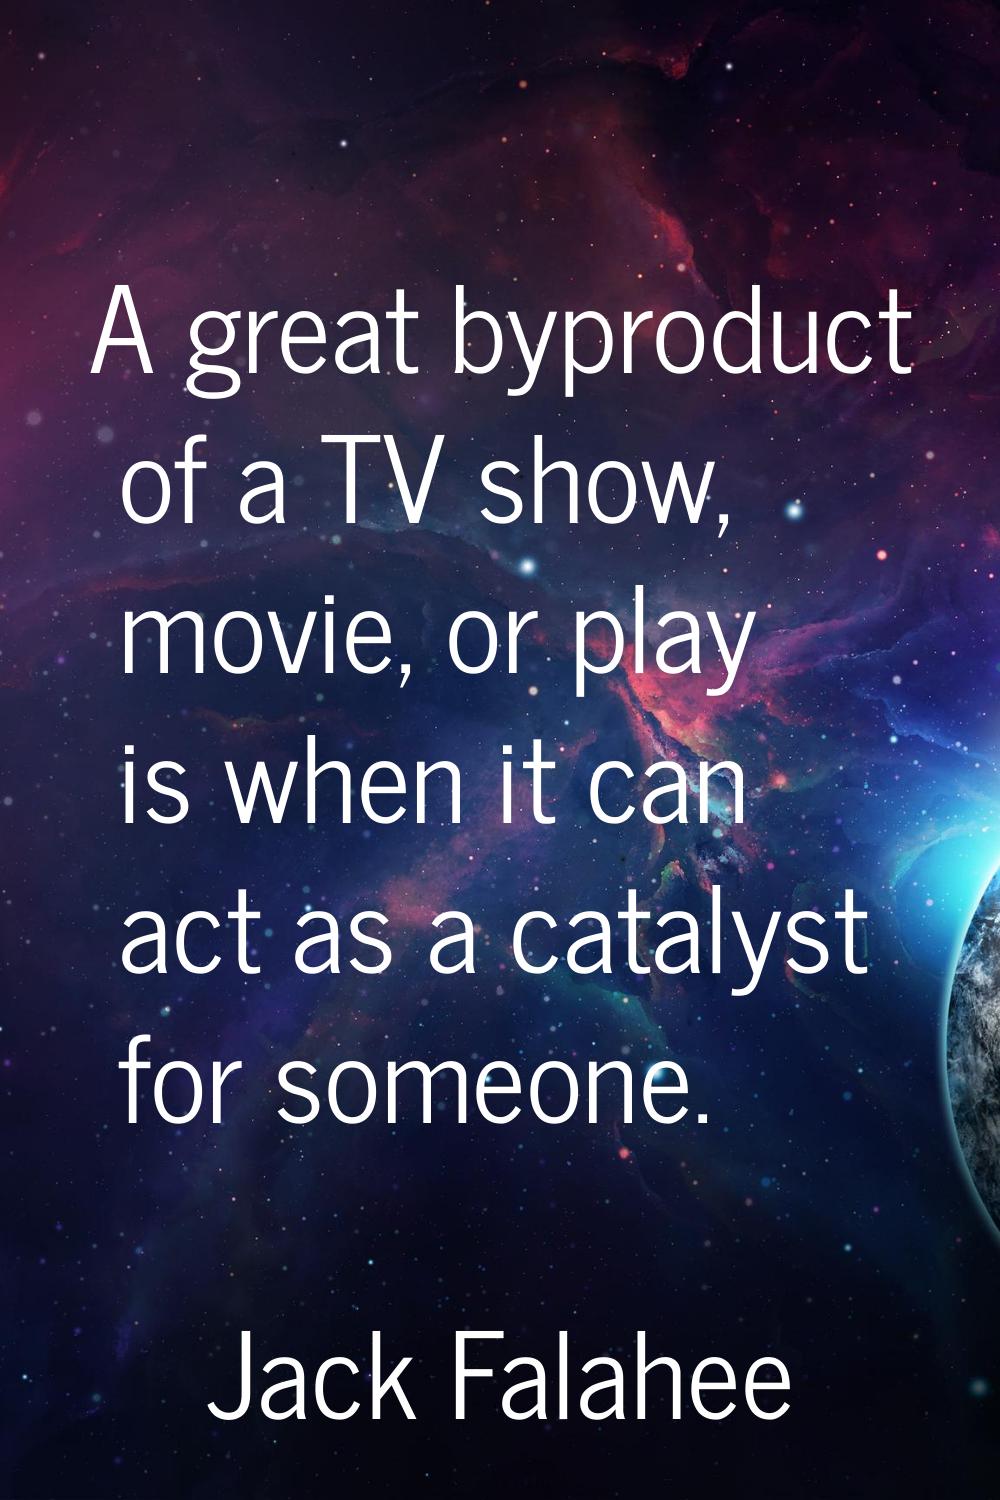 A great byproduct of a TV show, movie, or play is when it can act as a catalyst for someone.